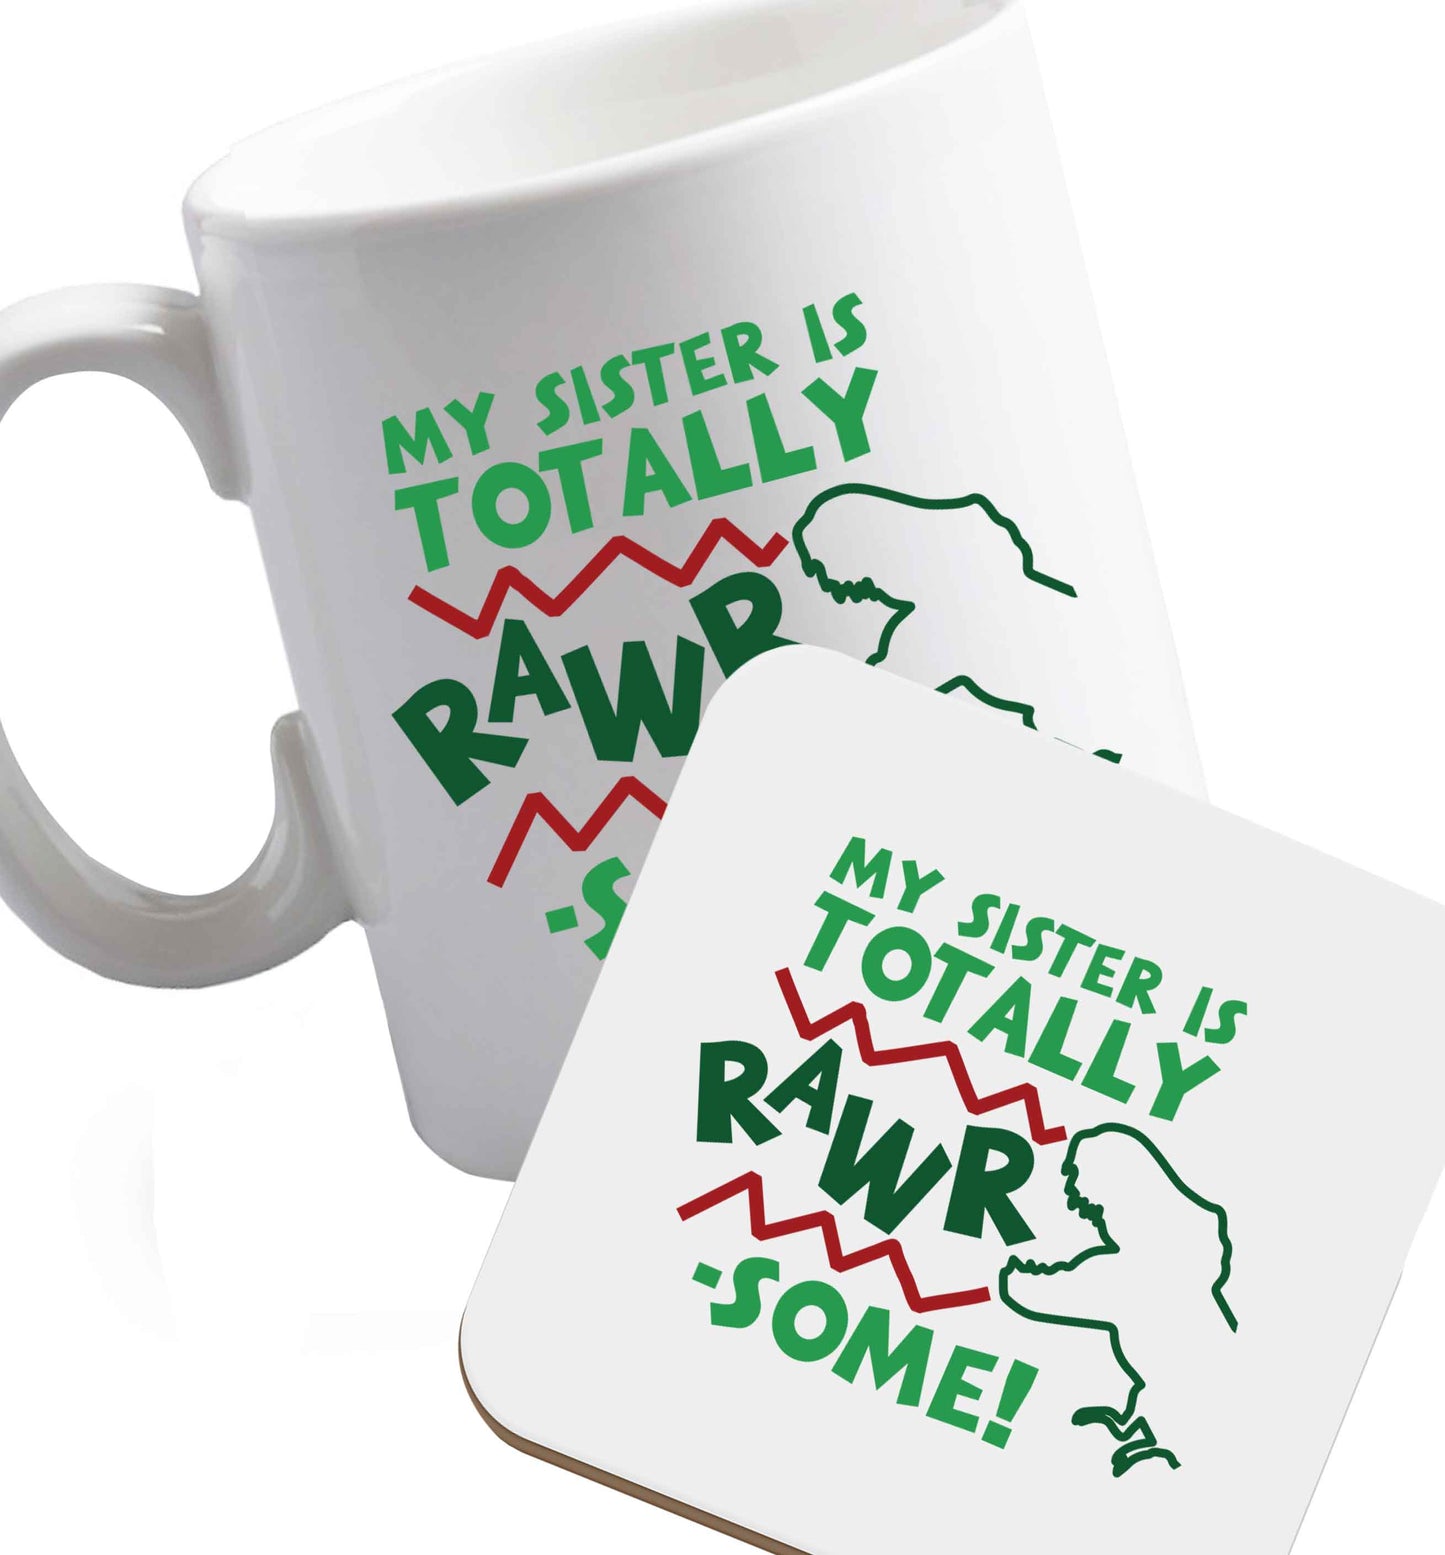 10 oz My sister is totally rawrsome ceramic mug and coaster set right handed